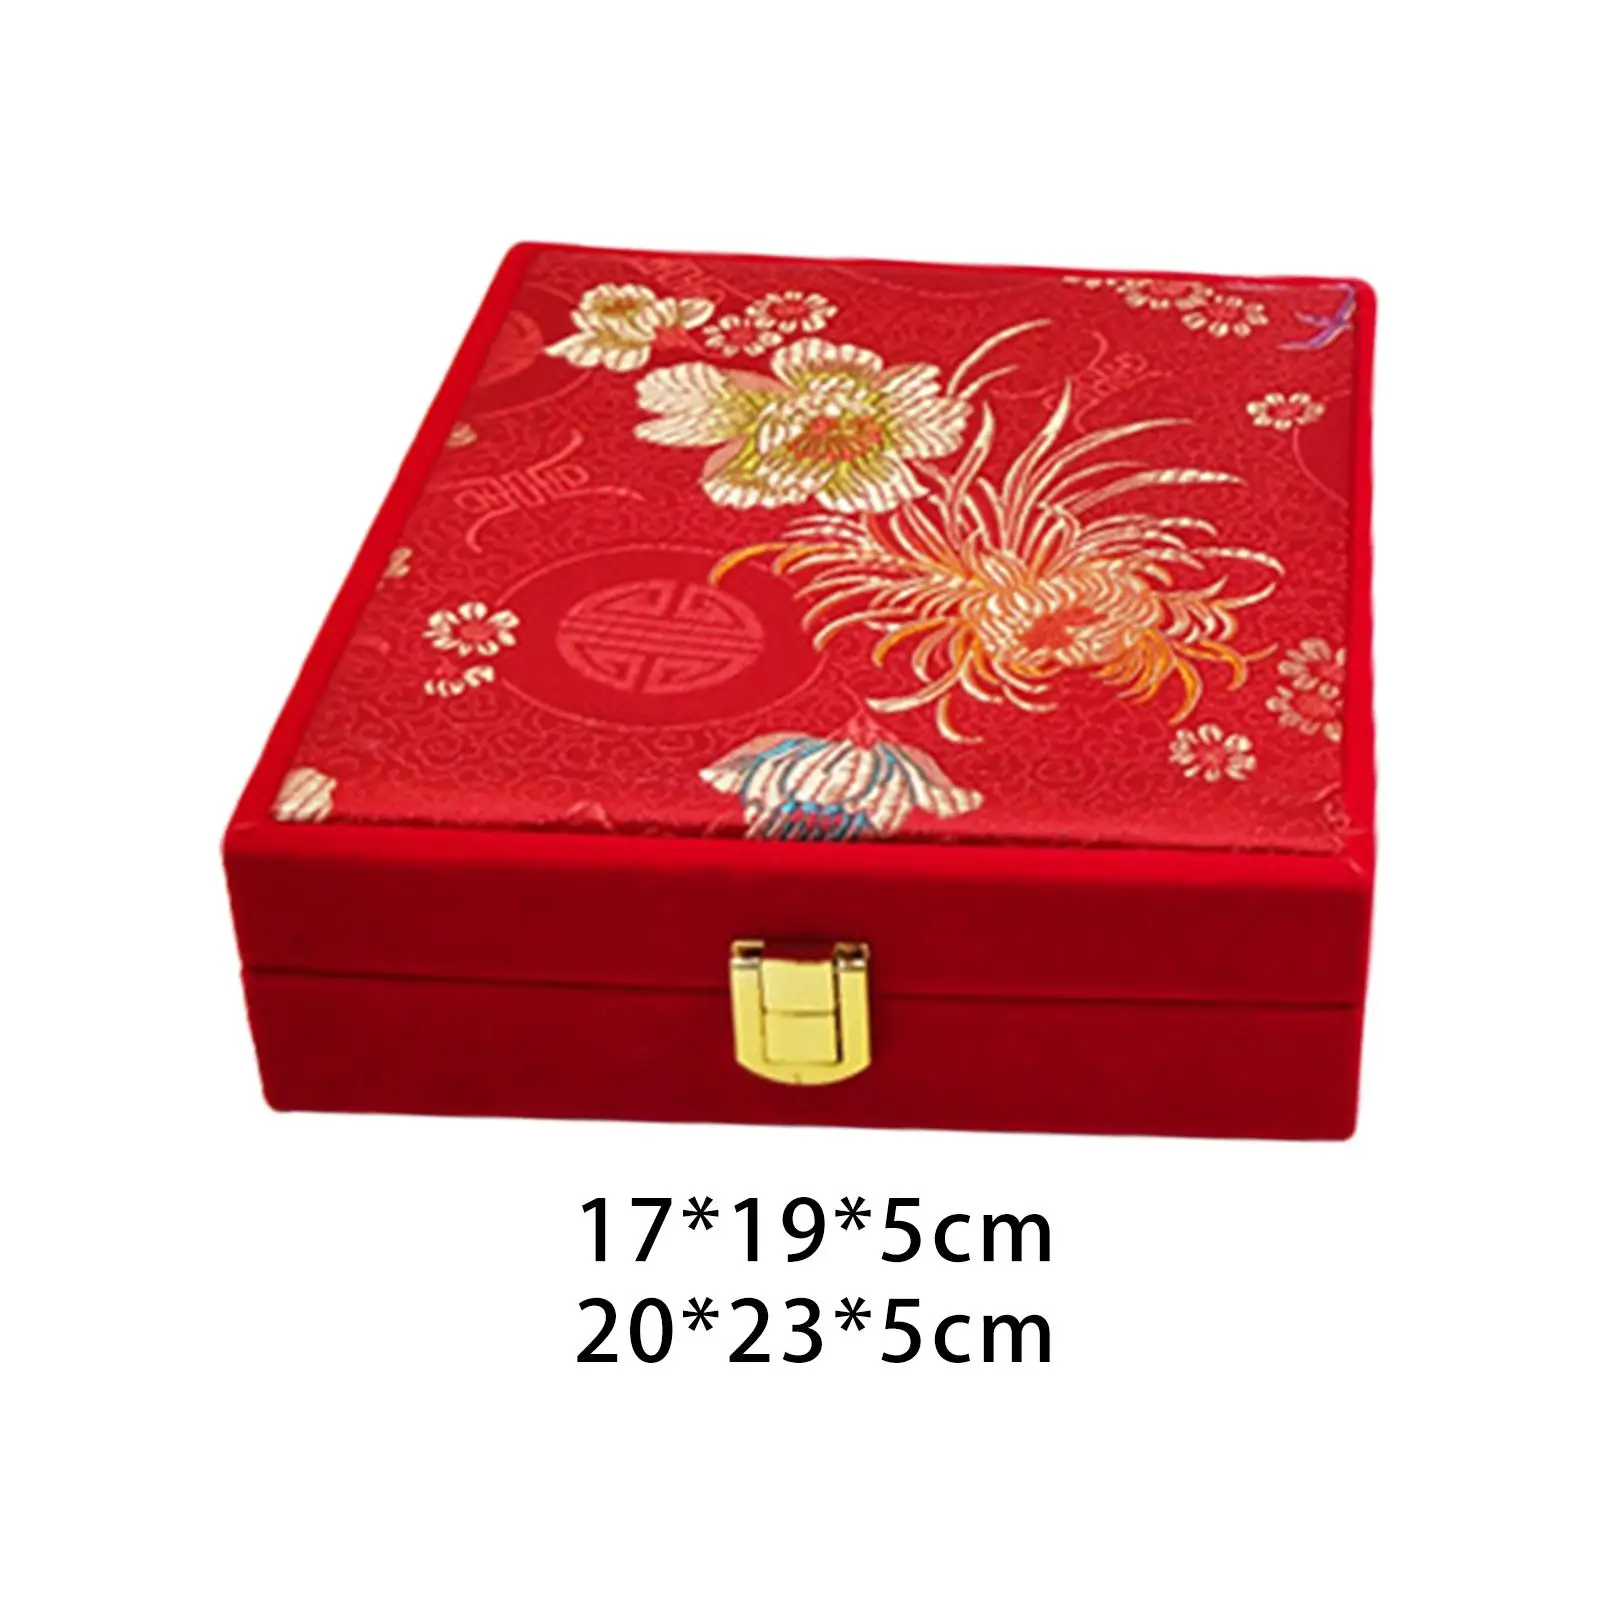 Multi Purpose Jewelry Display Box Bracelet Earrings Velvet Chinese Style Showcase Container Gift Box Storage Case for Wedding